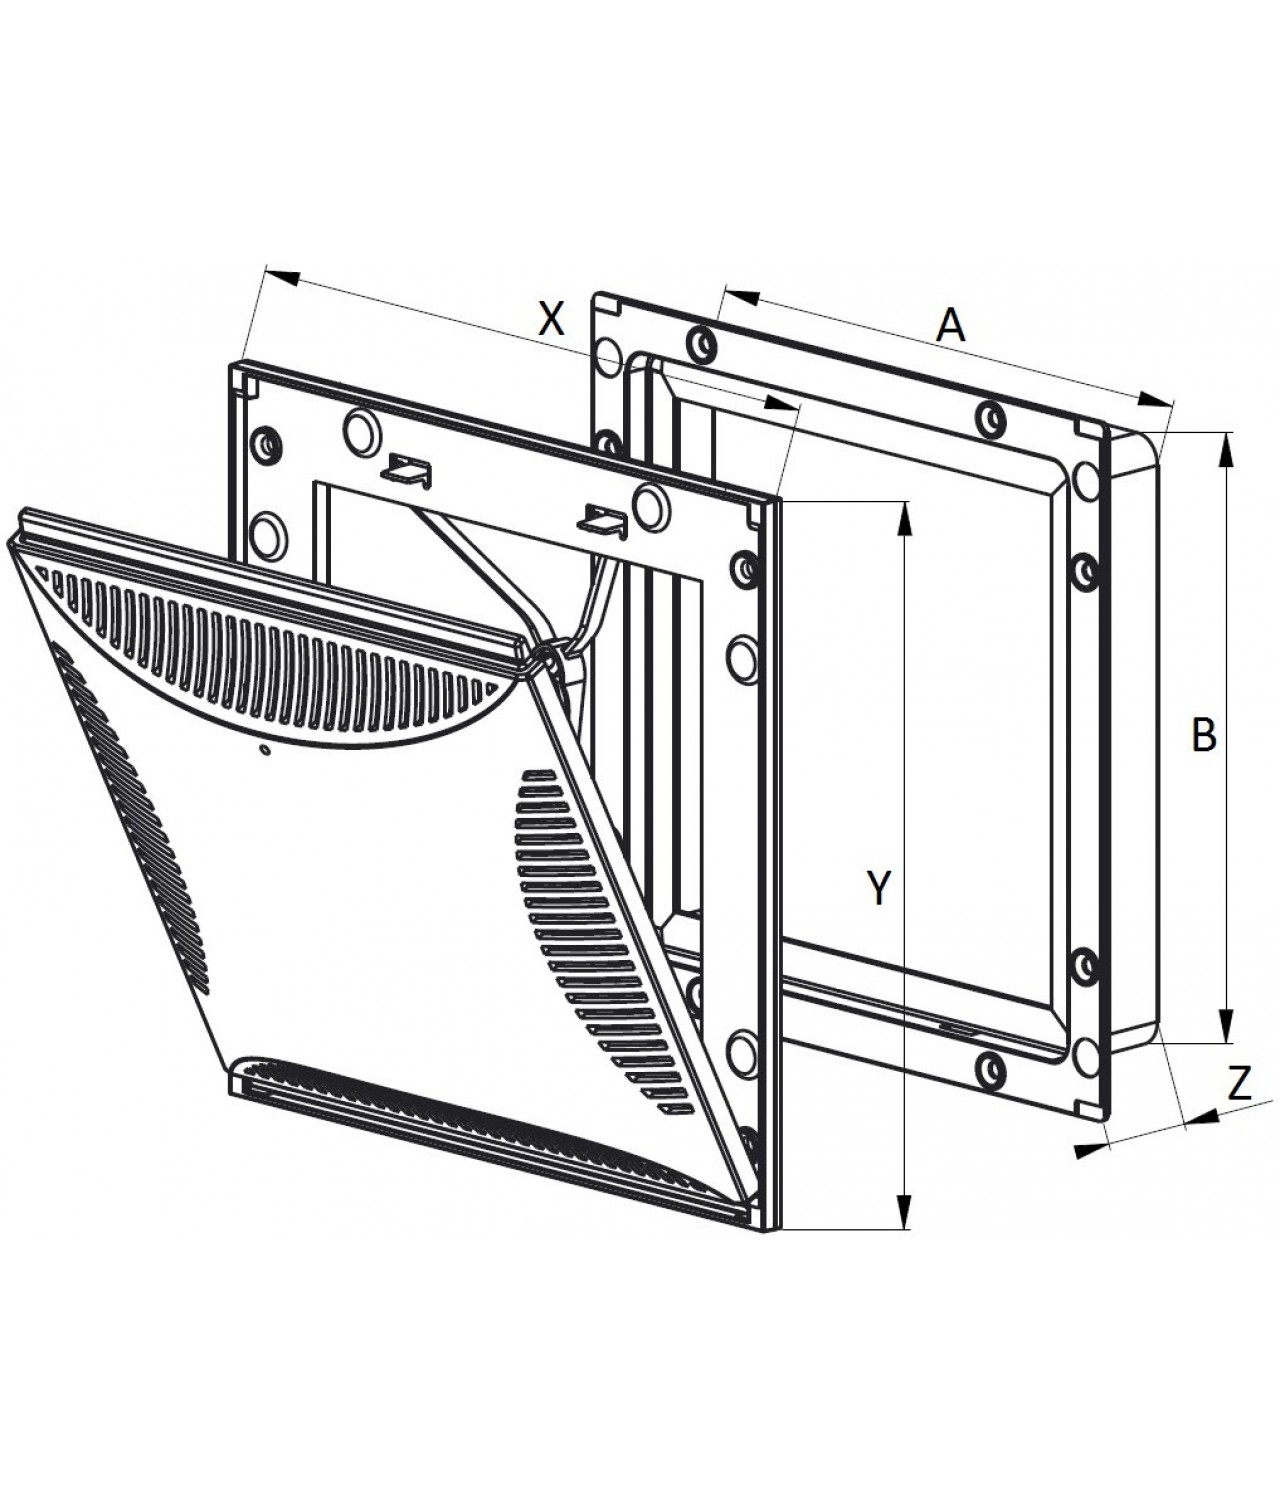 Vent cover adjustable TVS2, 185x185 mm - drawing